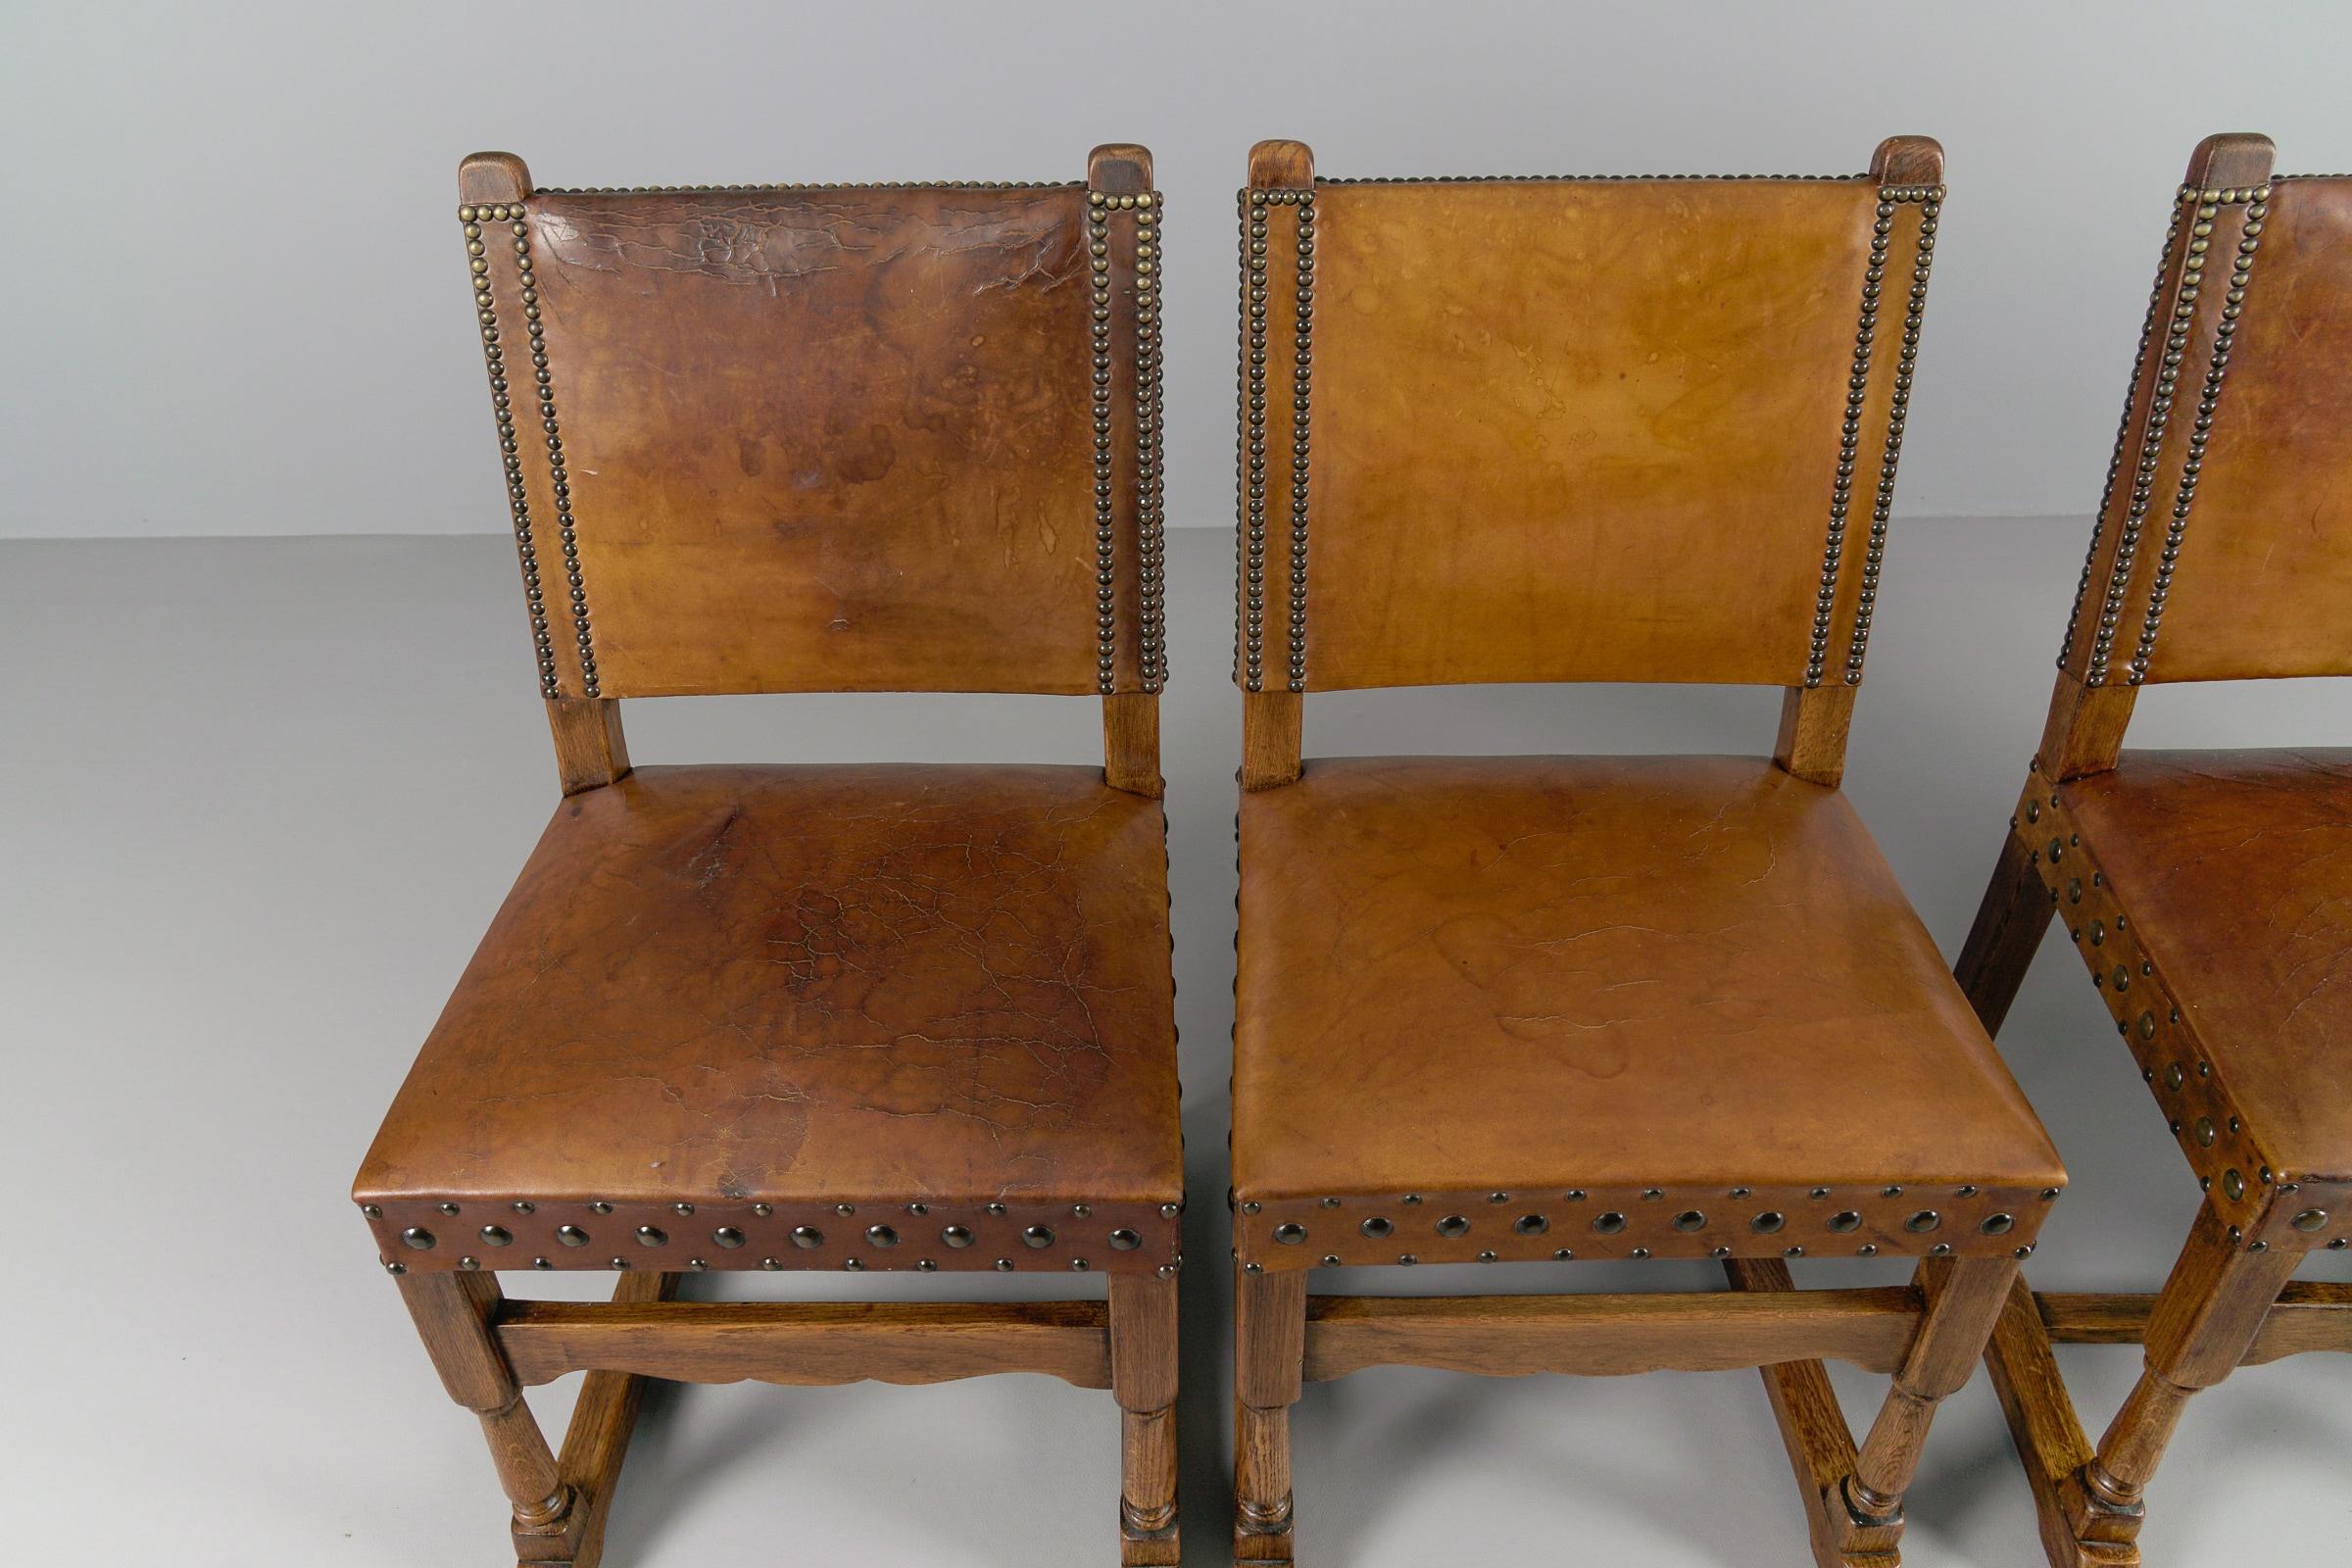  Spanish Leather and Wood Chairs, 1940s, Set of 4 For Sale 1